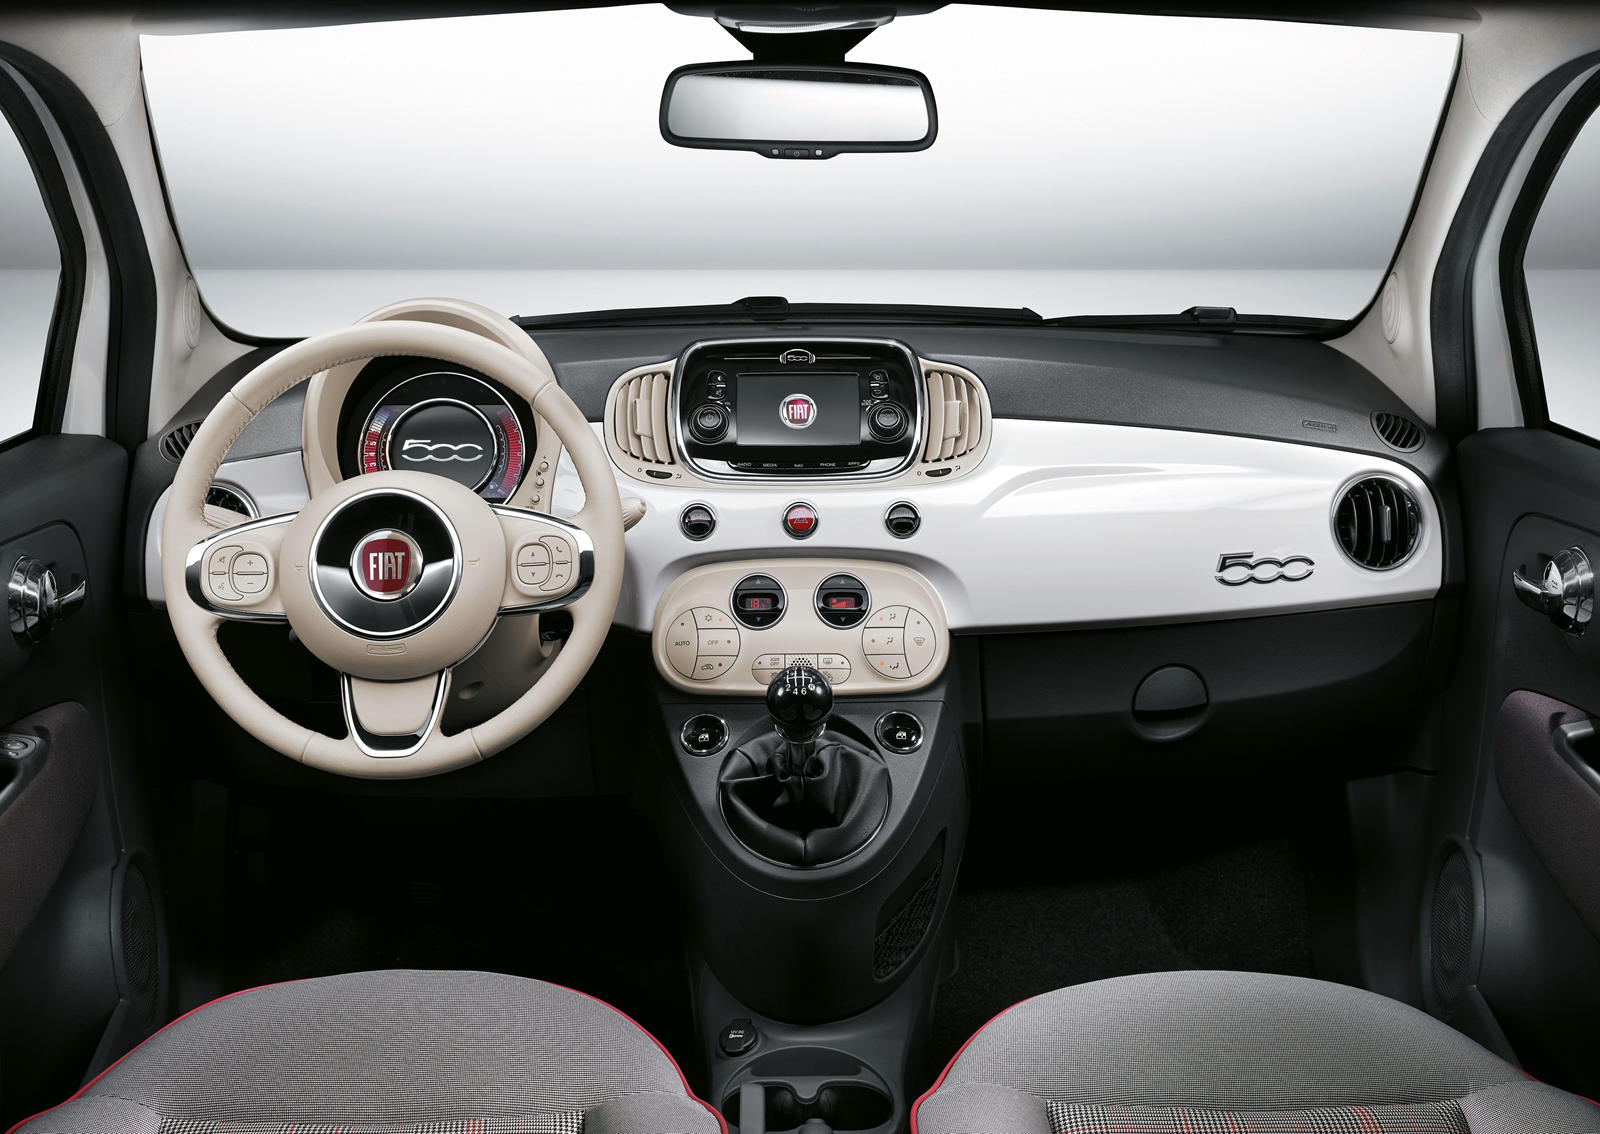 2019 Fiat 500 Interior Dimensions: Seating, Cargo Space & Trunk